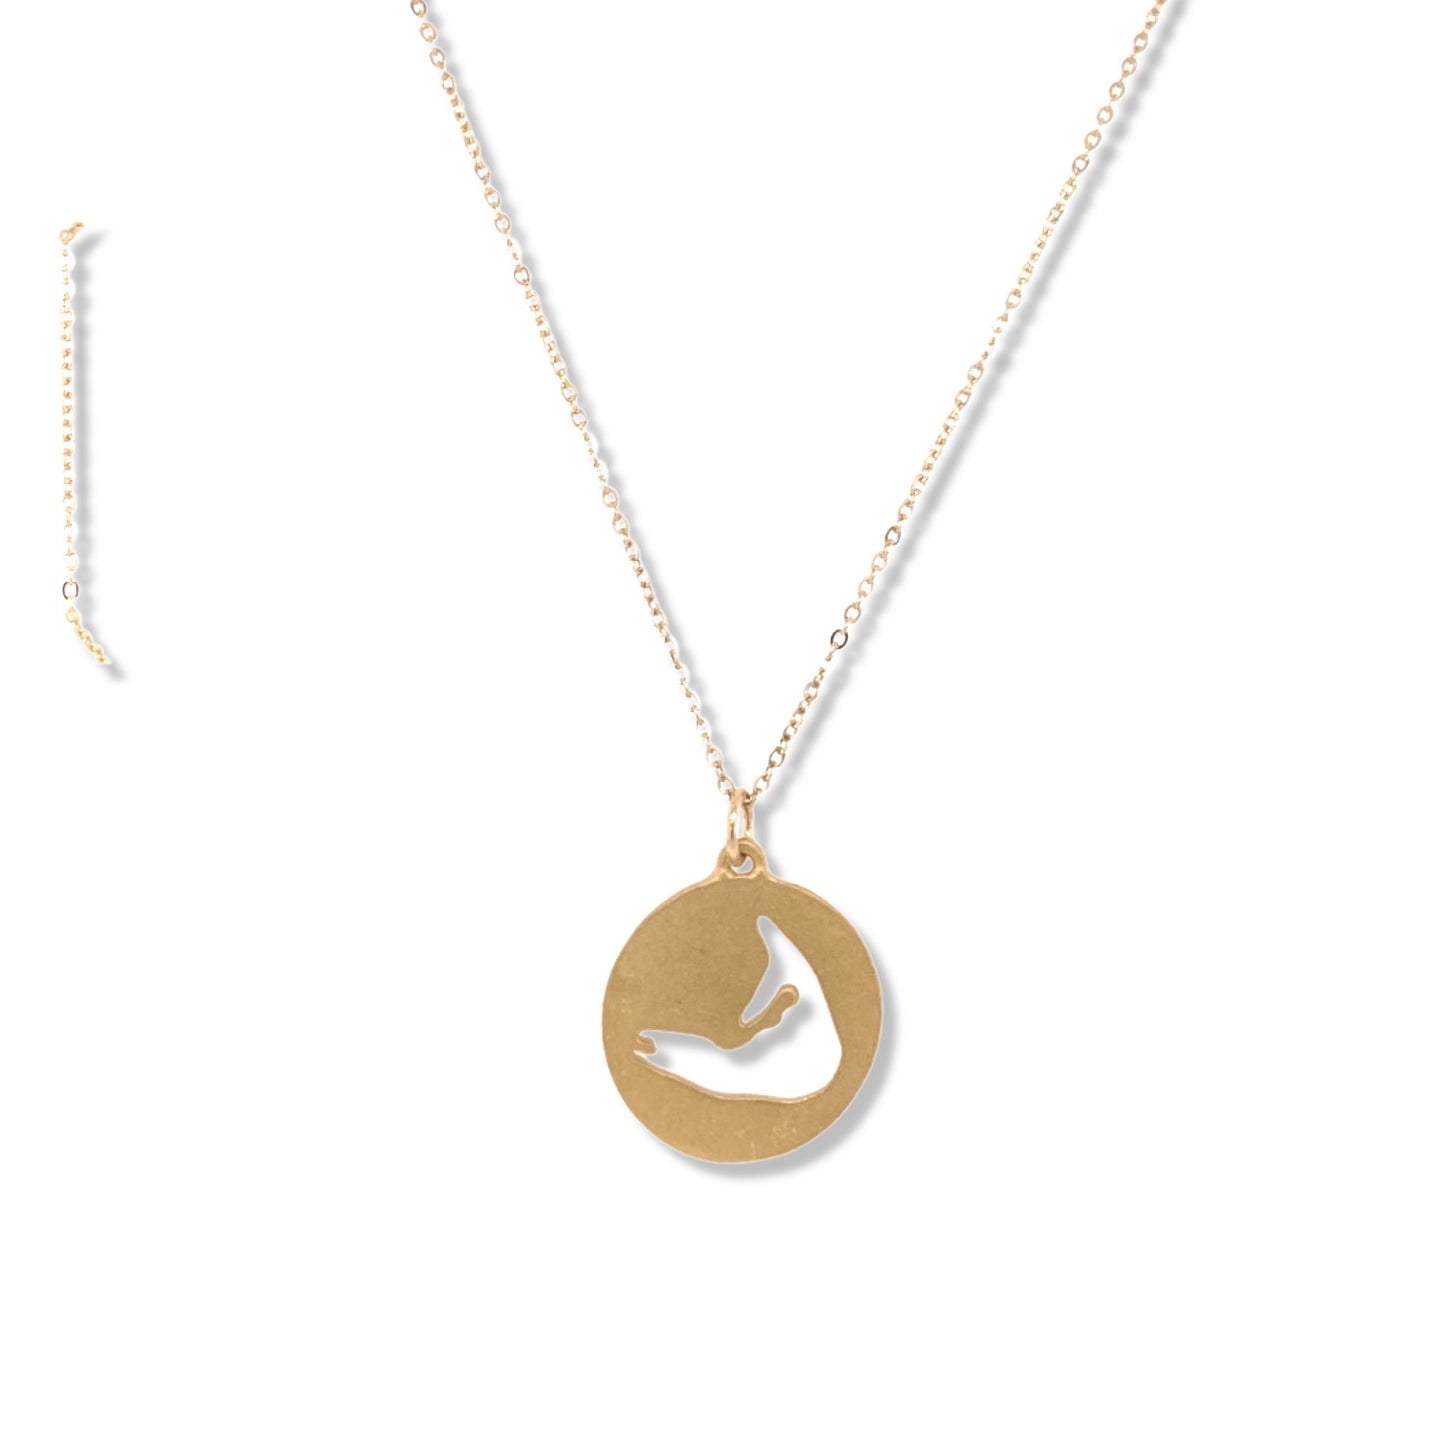 706NLG - Downtown Nantucket Necklace in Gold